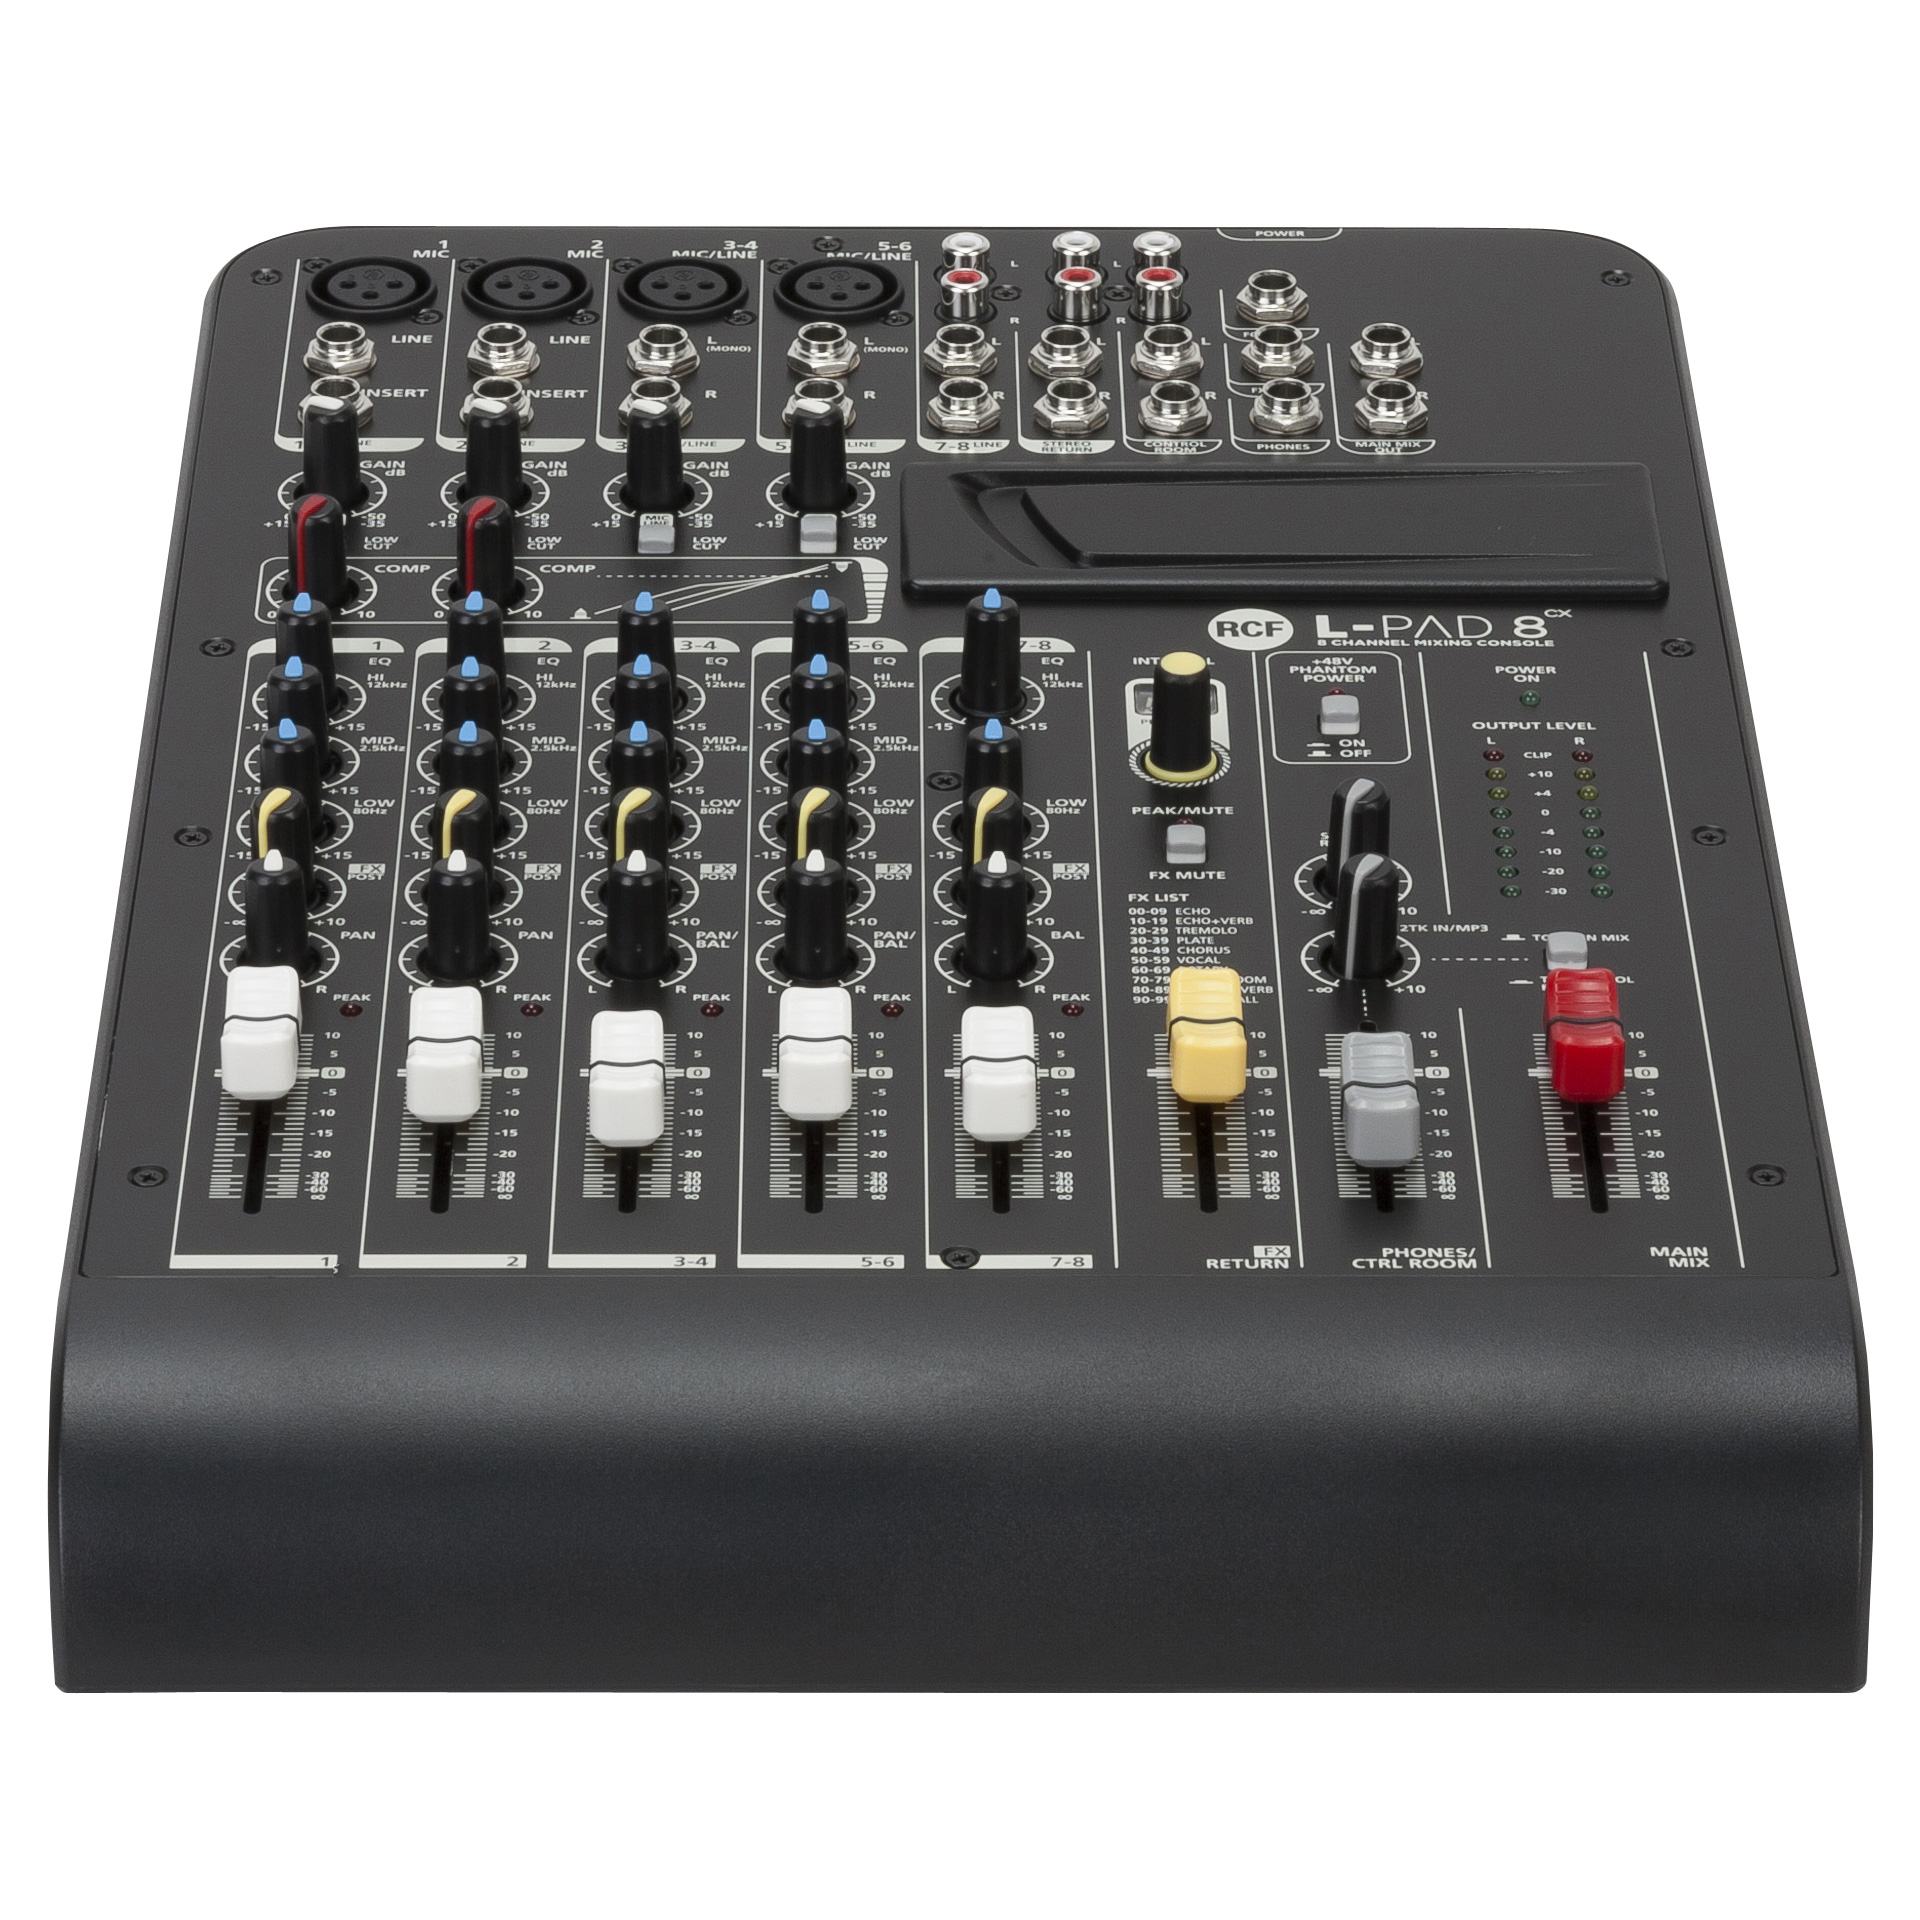 L-PAD 8CX 8 CHANNEL MIXING CONSOLE WITH EFFECTS